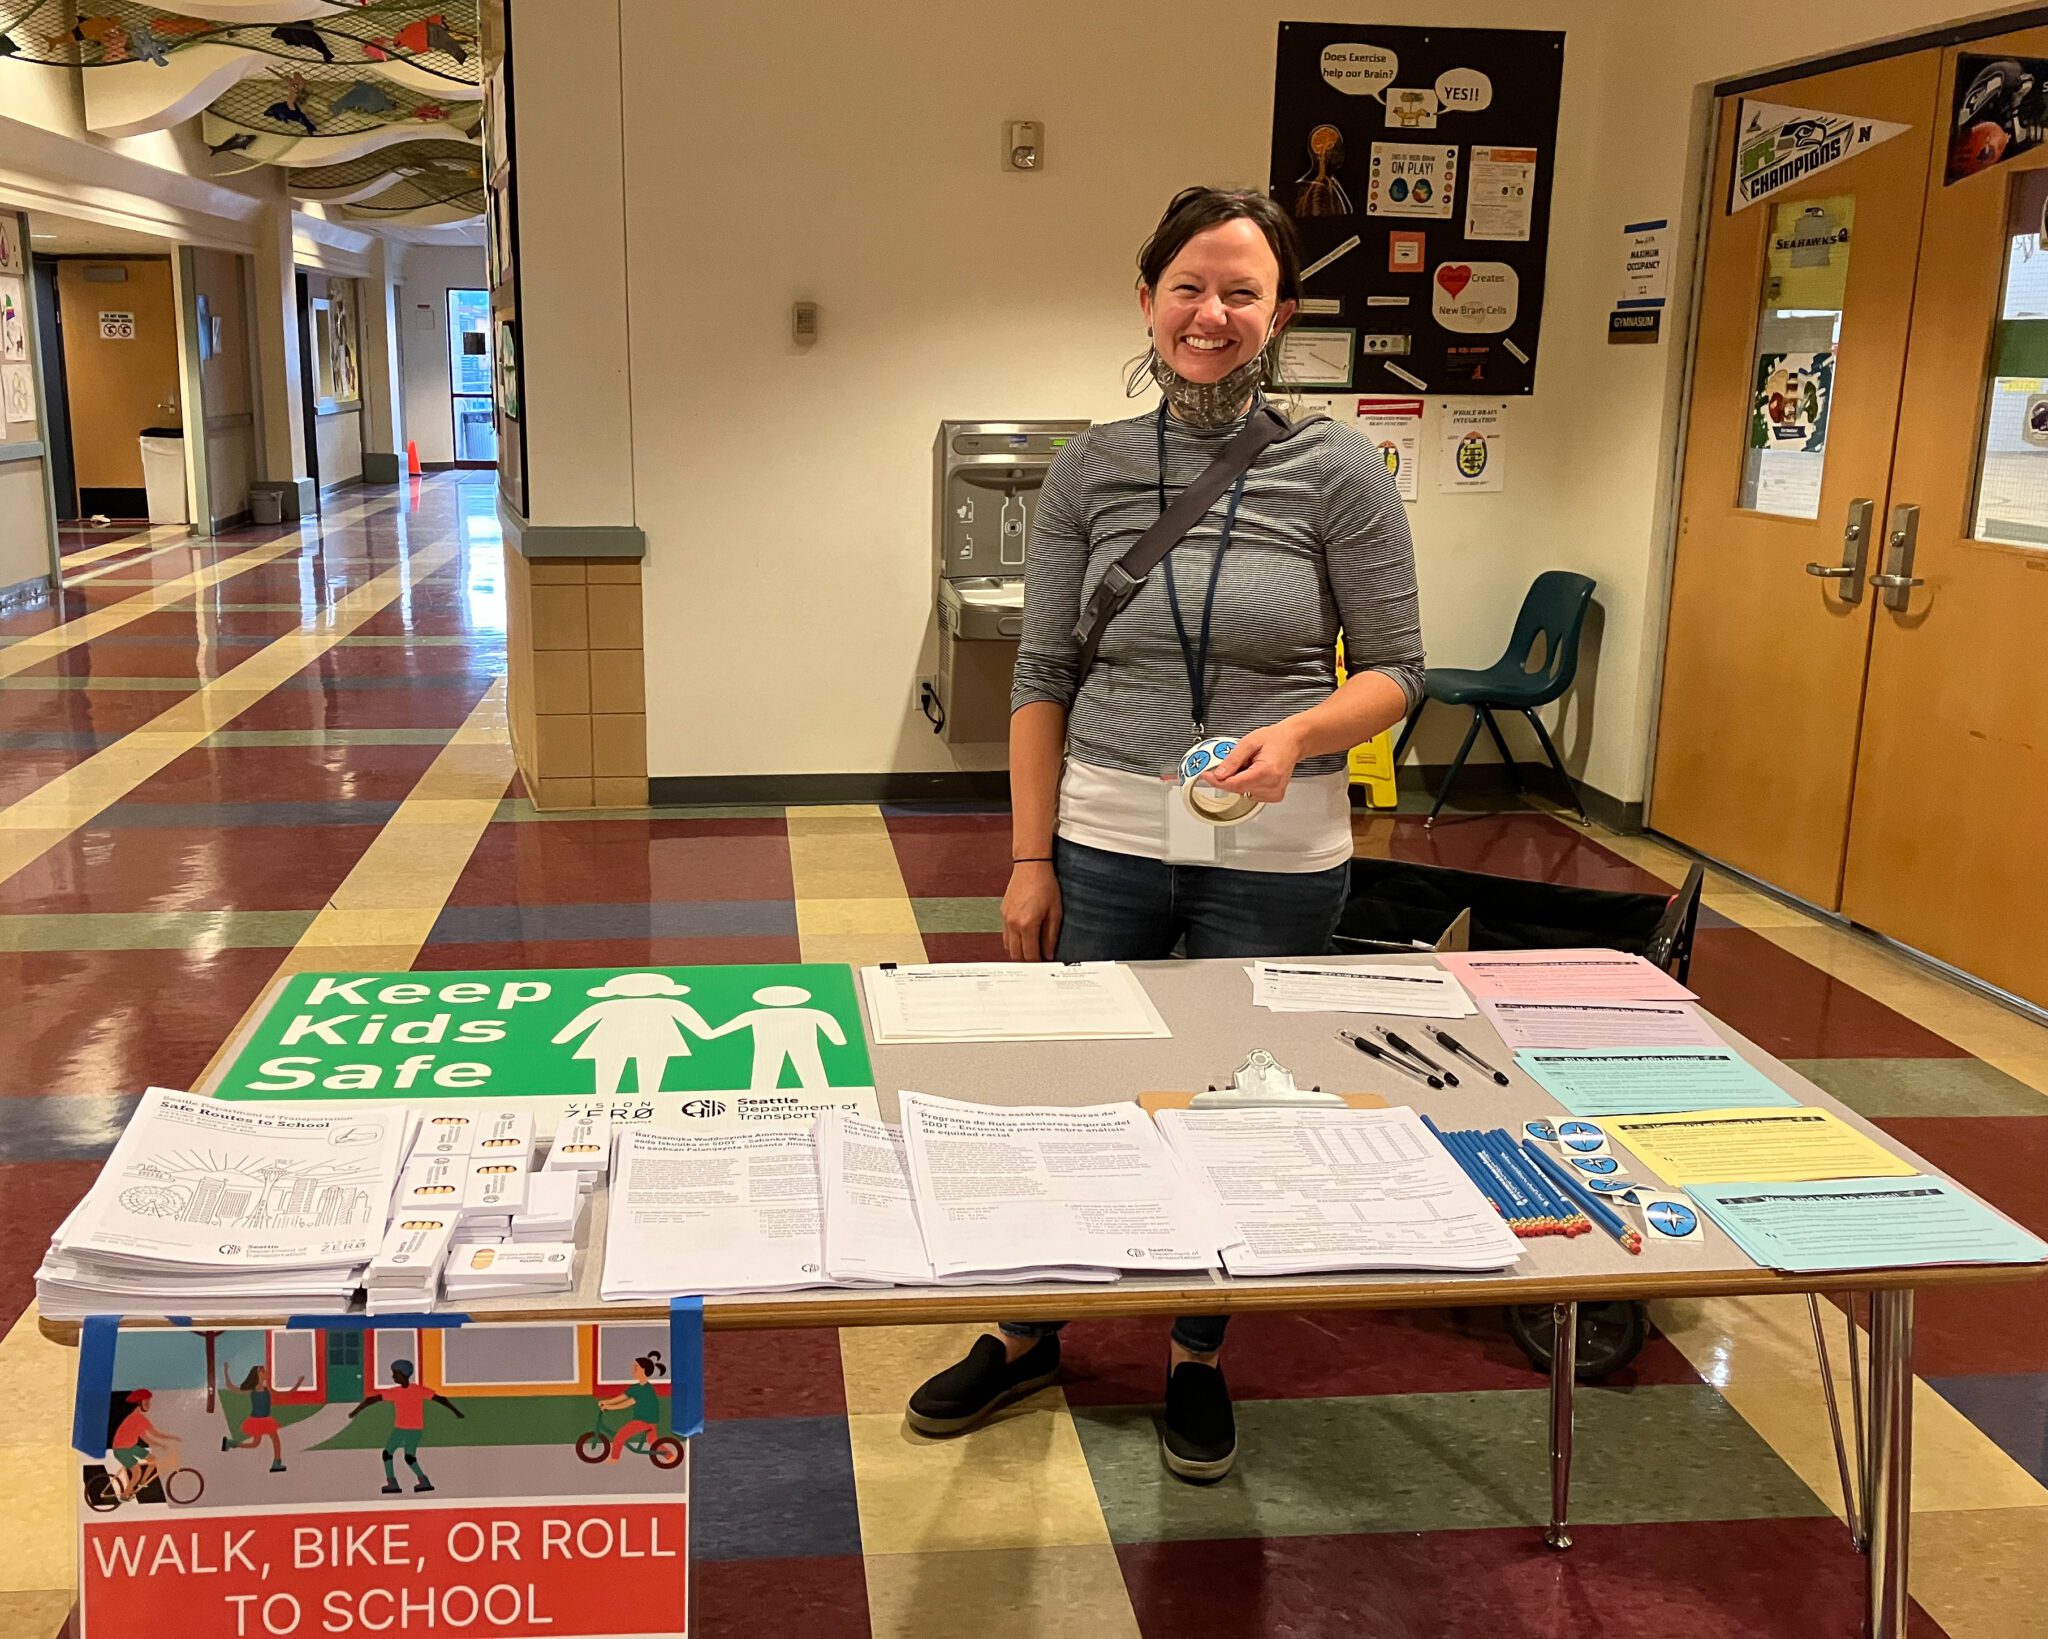 A woman smiles at the camera while standing in front of a table of informational handouts inside a building.